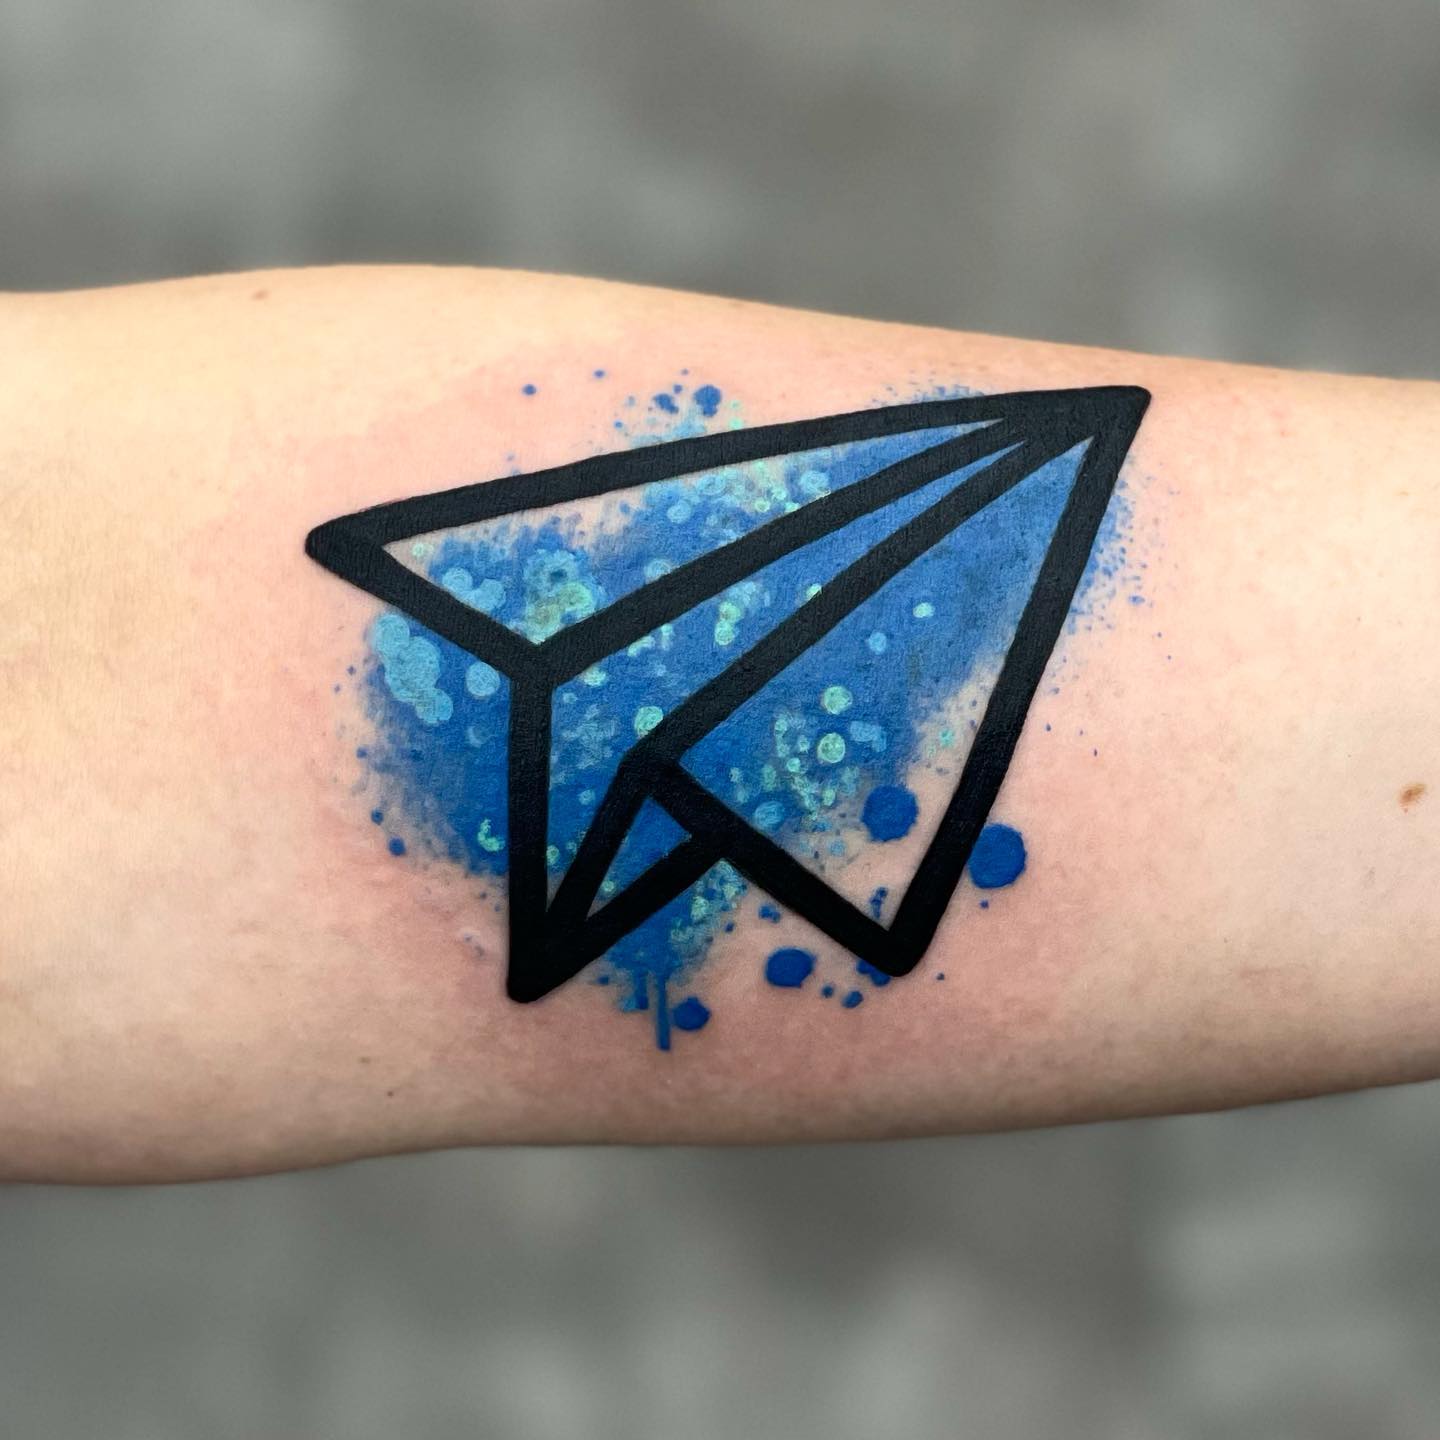 25+ Paper Airplane Tattoo Designs That Are Simple But Cool & Cute